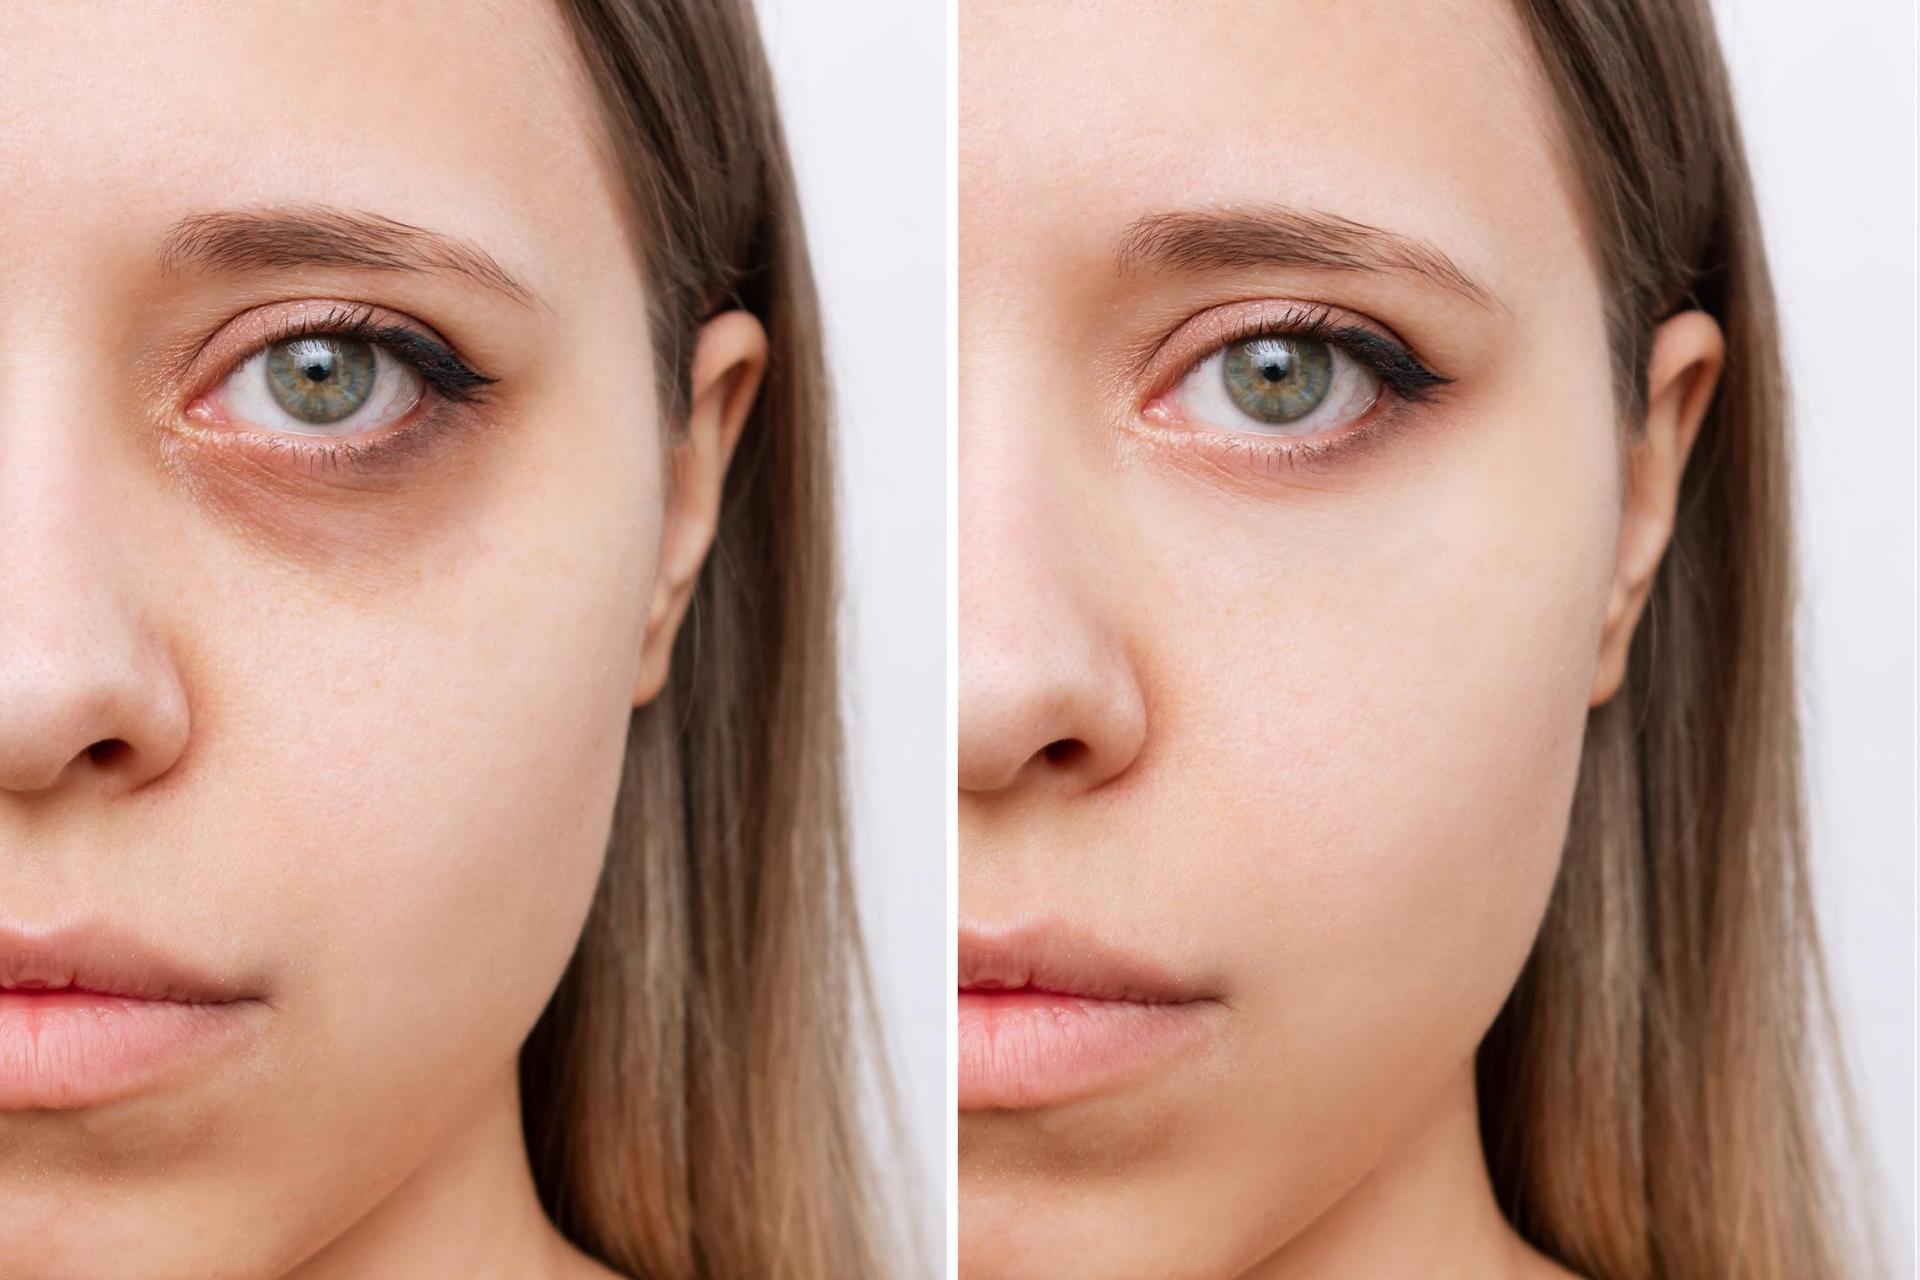 The best way to deal with dark circles under the eyes.  Combine 3 ingredients and after 15 minutes you will see the results